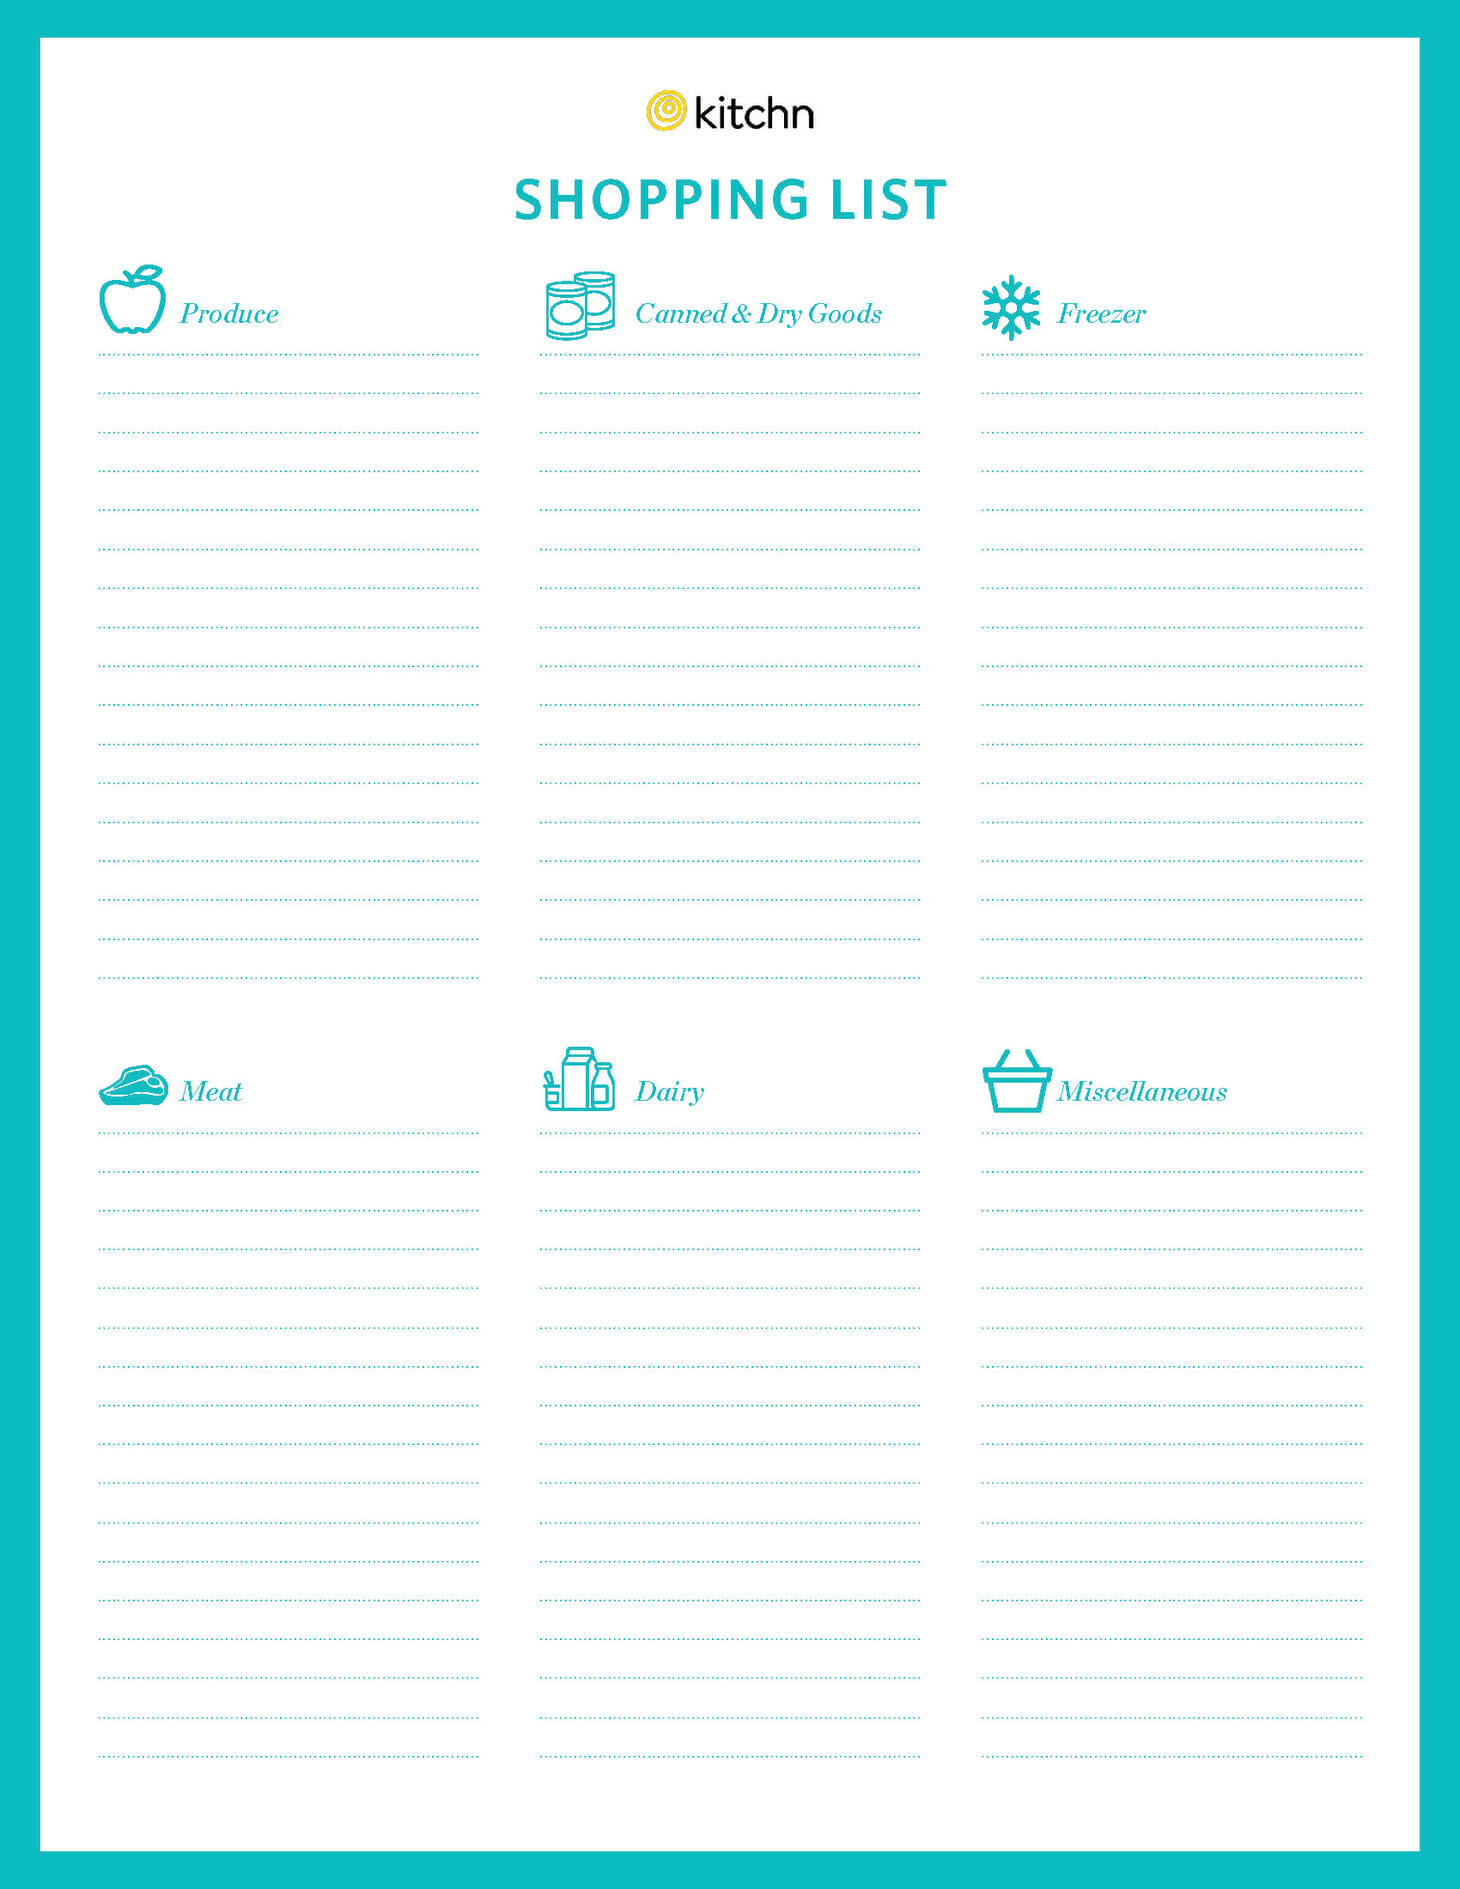 Download Our Free Printable Grocery Shopping List | Kitchn With Regard To Blank Grocery Shopping List Template